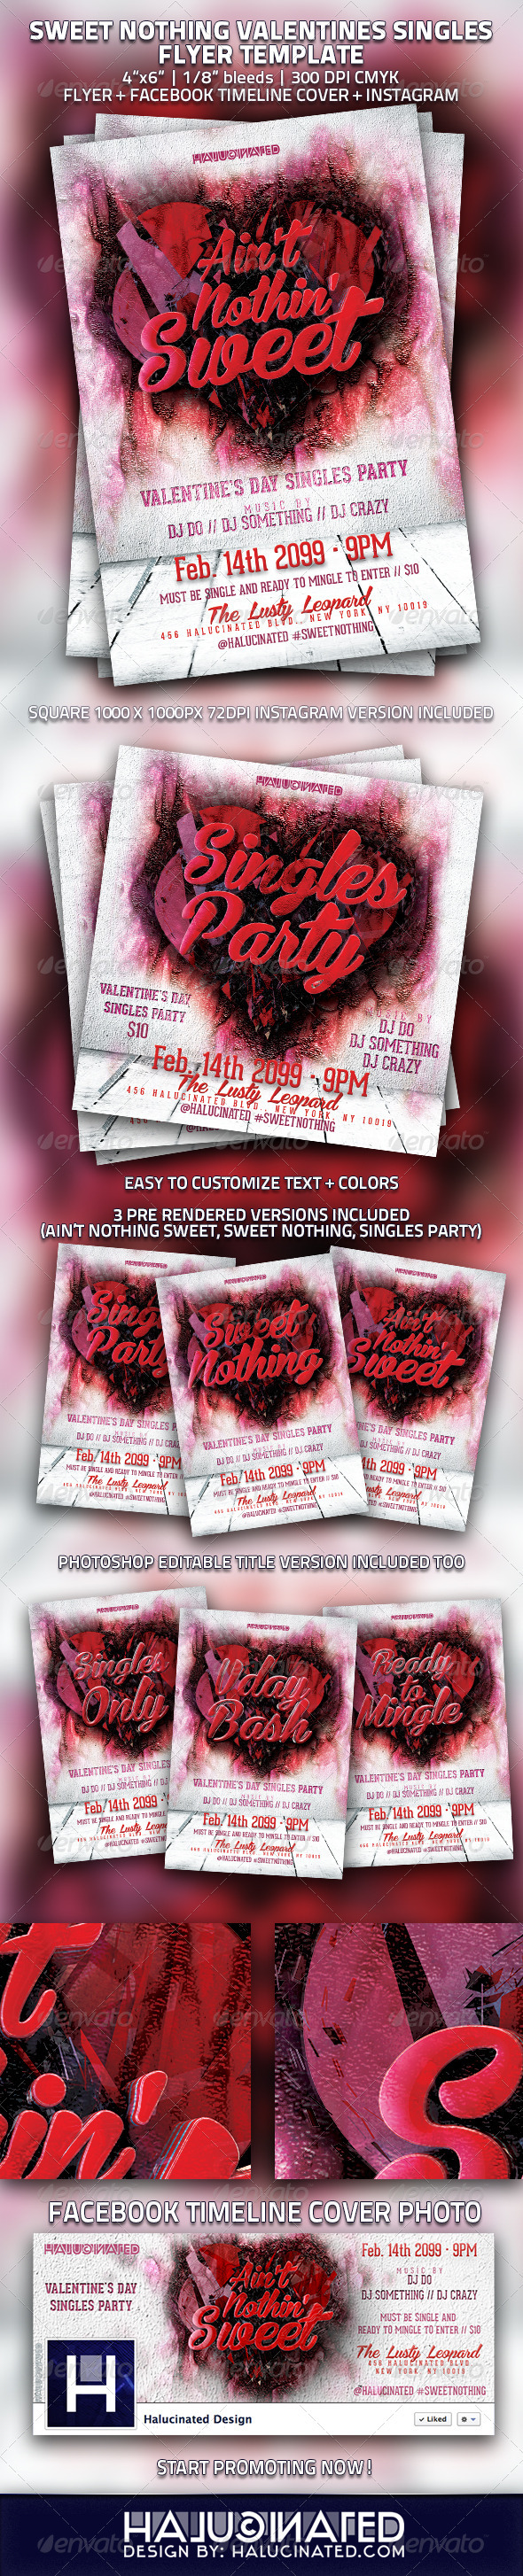 Sweet Nothing Valentines Singles Flyer Template